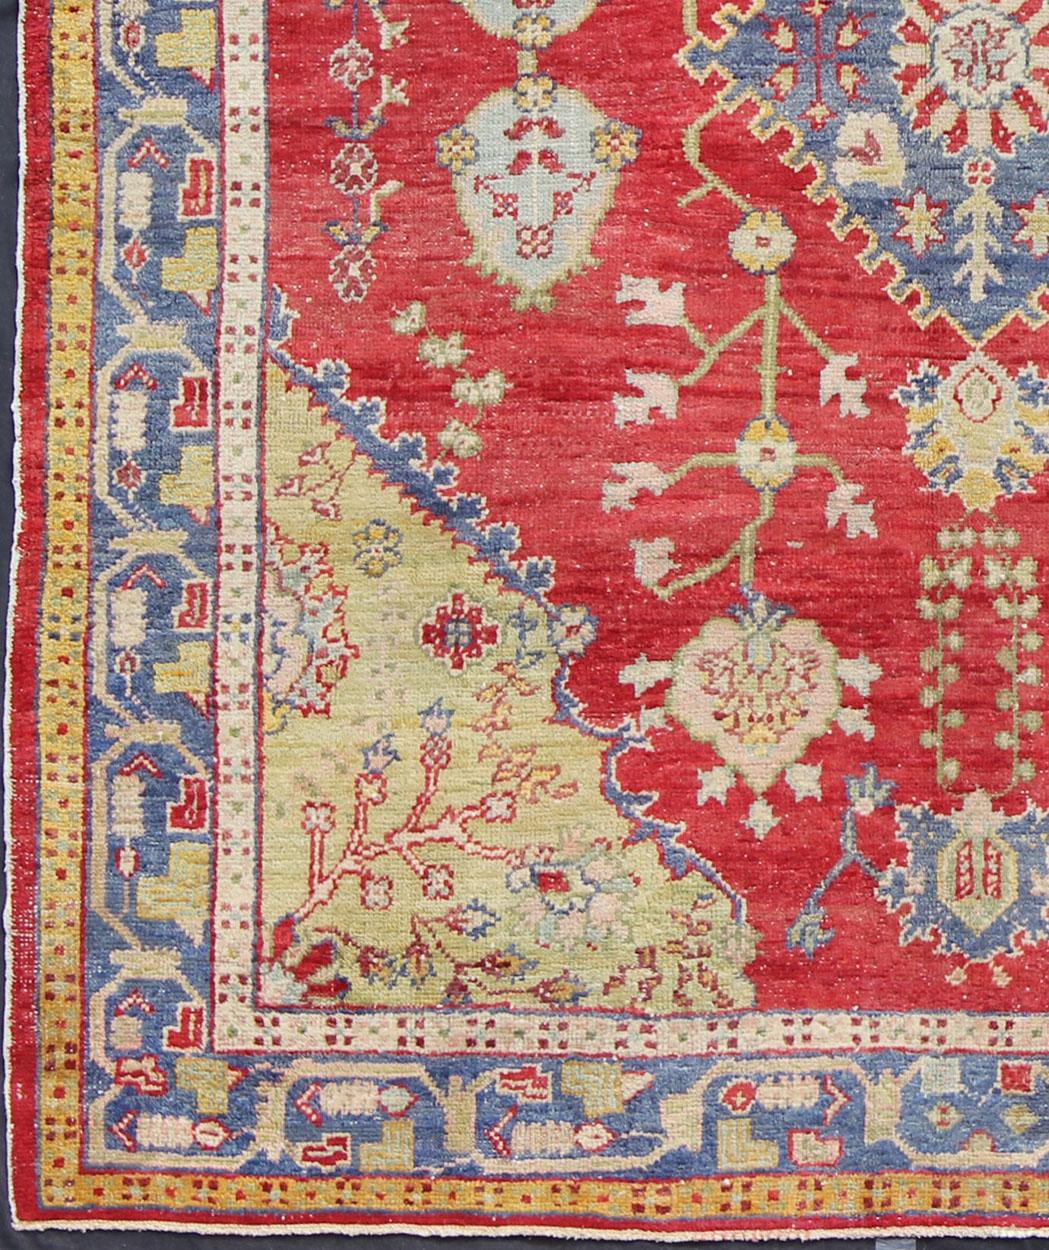 Antique Oushak in Red, Blue and light Yellow Green. Country of Origin: Turkey; Type: Oushak; Design: Medallion; Keivan Woven Arts: rug /EN-141060

Measures: 7'6'' x 9'6''

This antique Oushak rug displays denim blue as the prominent border with